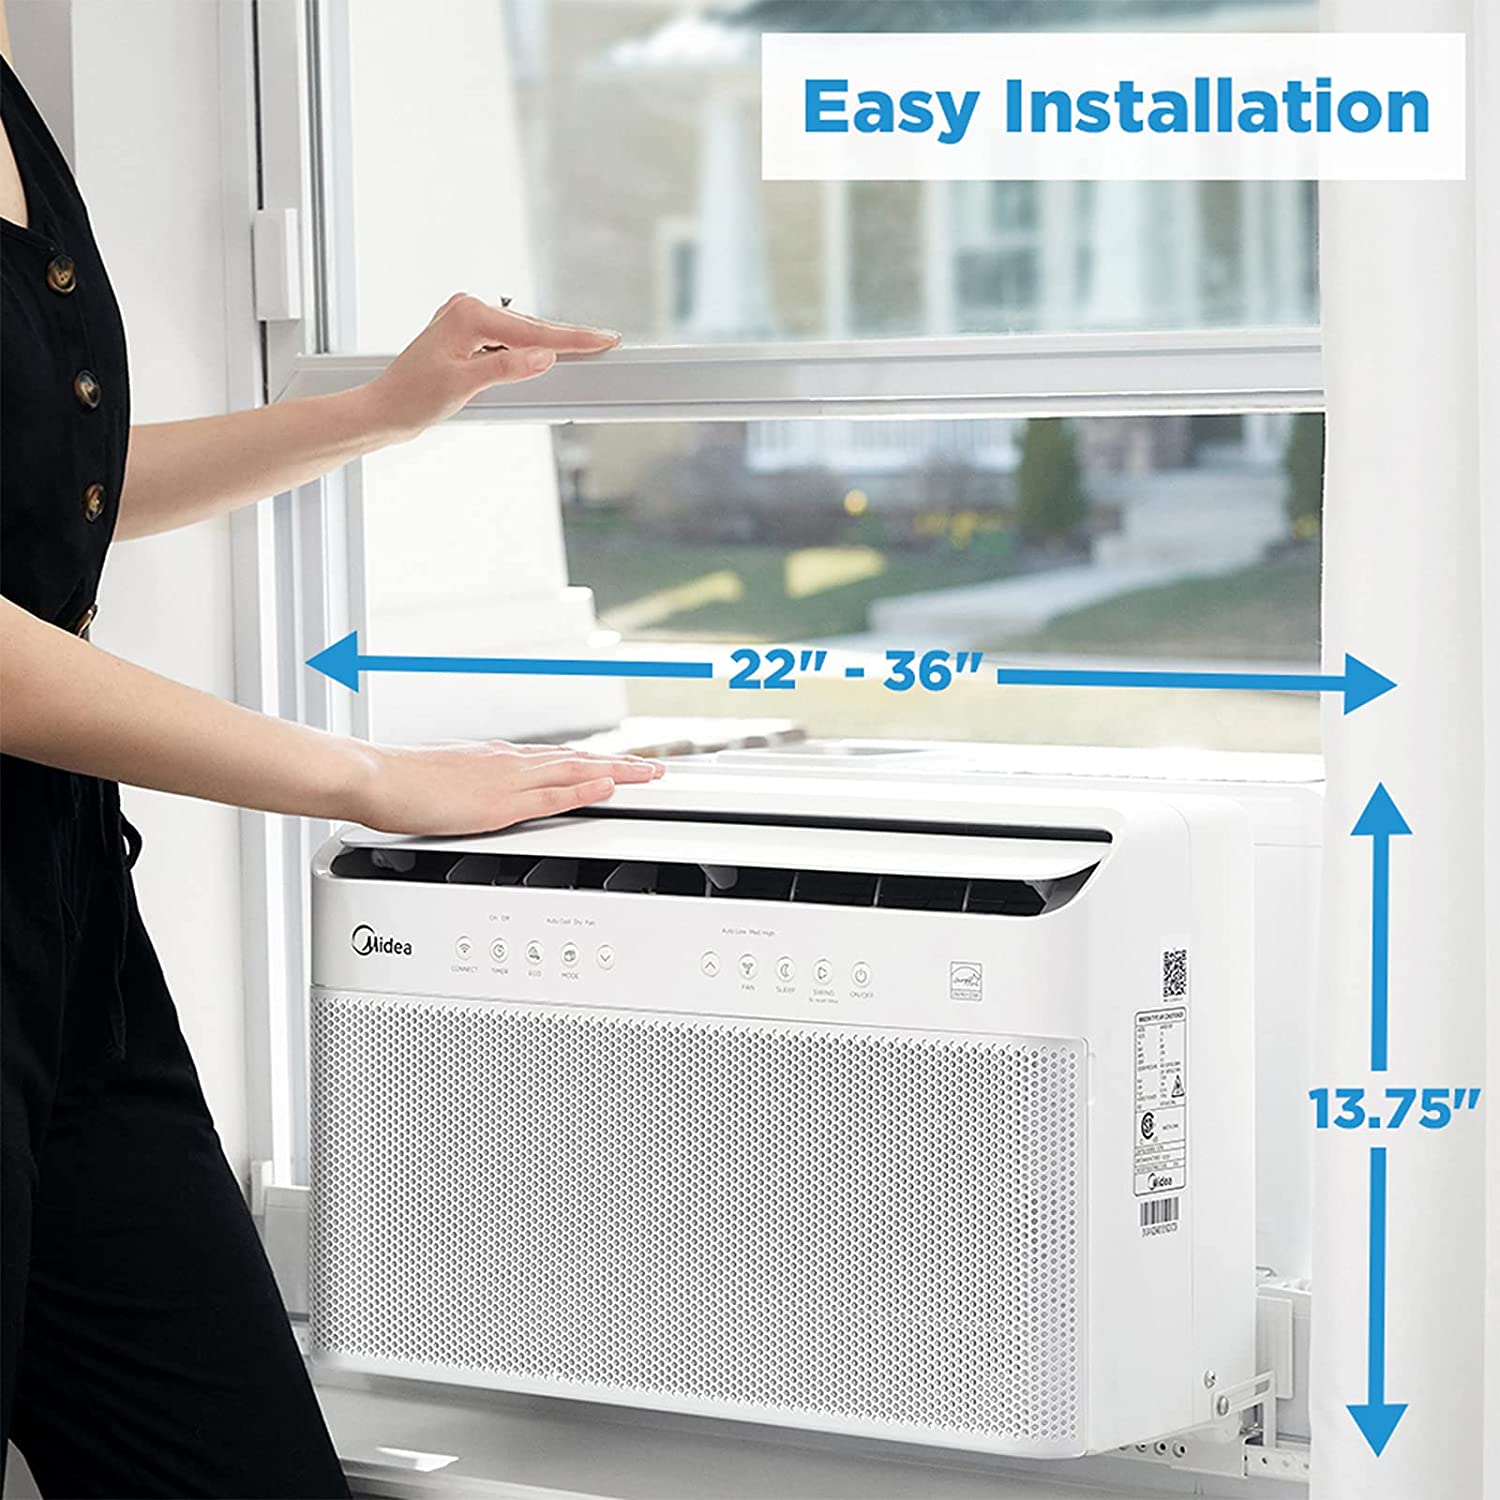 10 BEST 8000 BTU WINDOW AIR CONDITIONER 2022 REVIEW All In One Cooling Gear Lab: Any Refrigerators Air Conditioners Freezers Ice Makers Coolers Fans Reviewed And Compared.